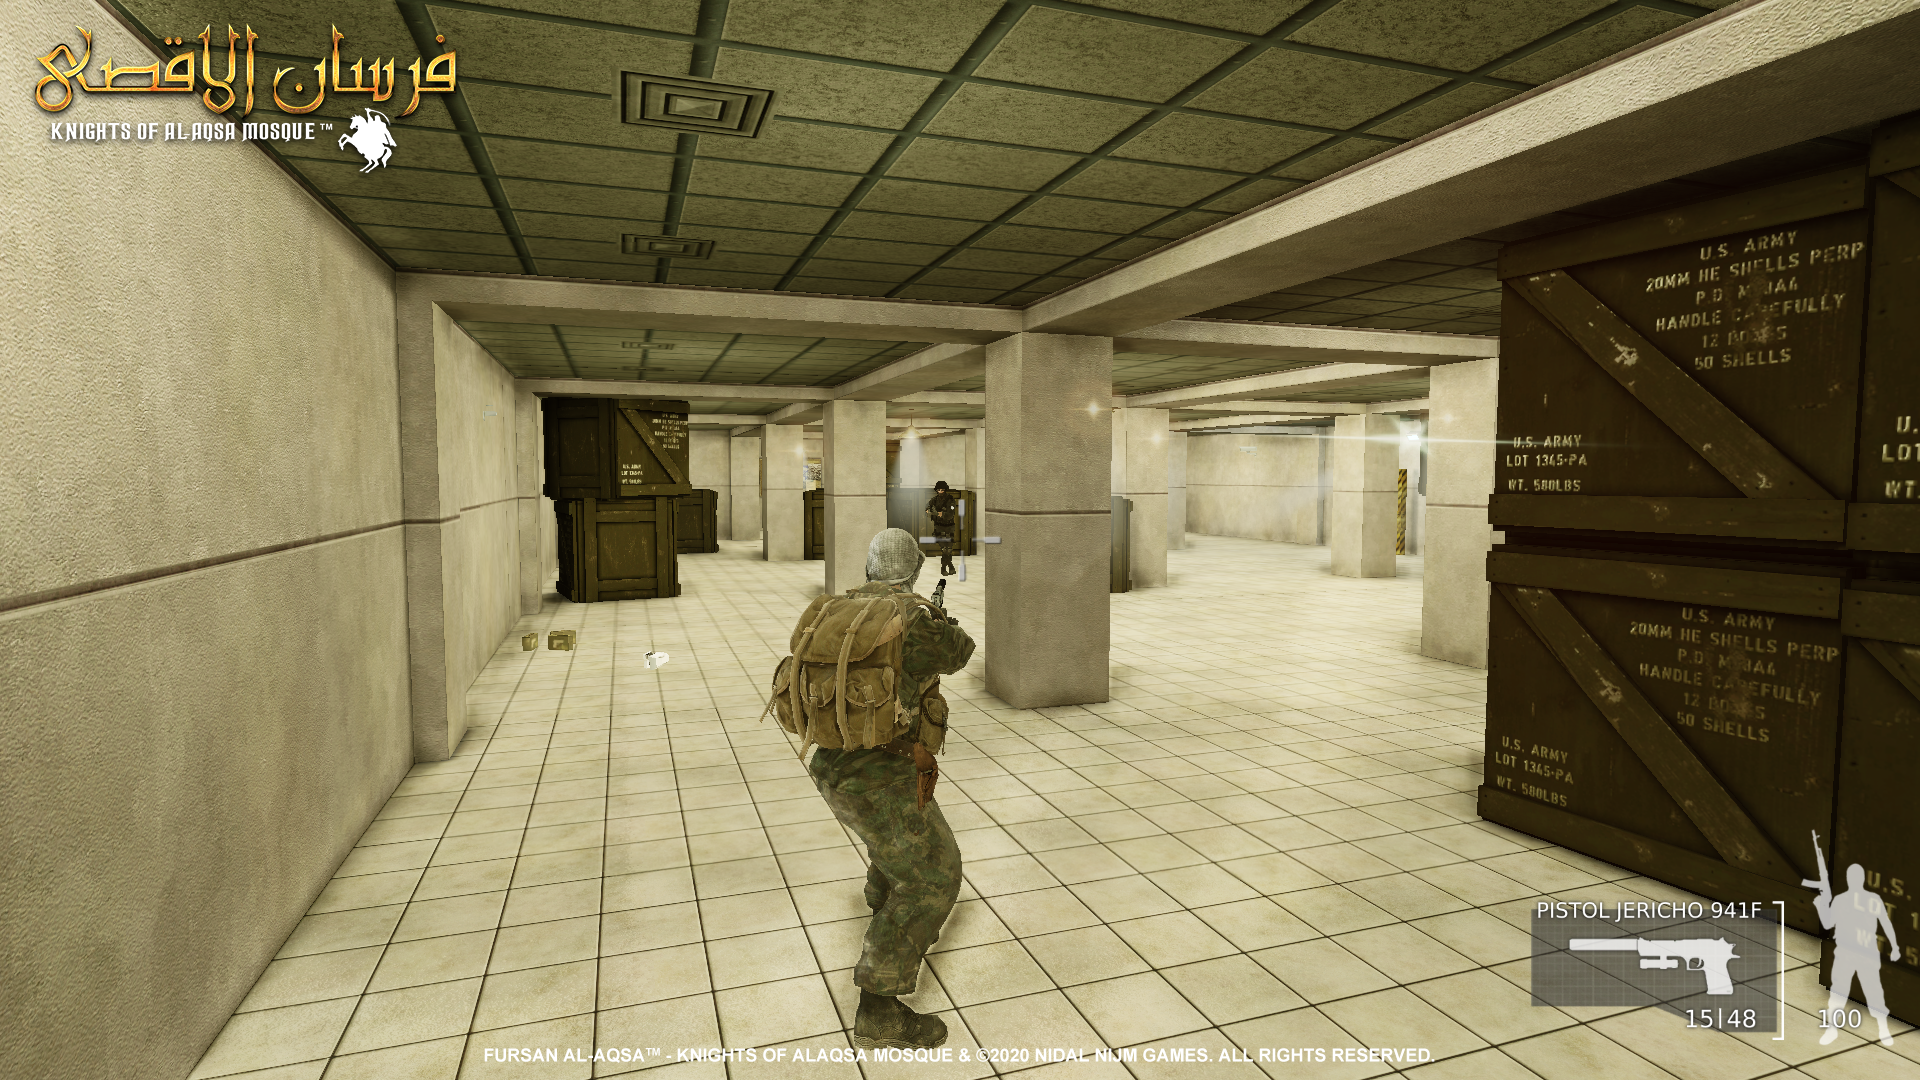 Fursan alAqsa  Showcase Mossad Office Up 4 - I am developing a game about Palestine Resistance